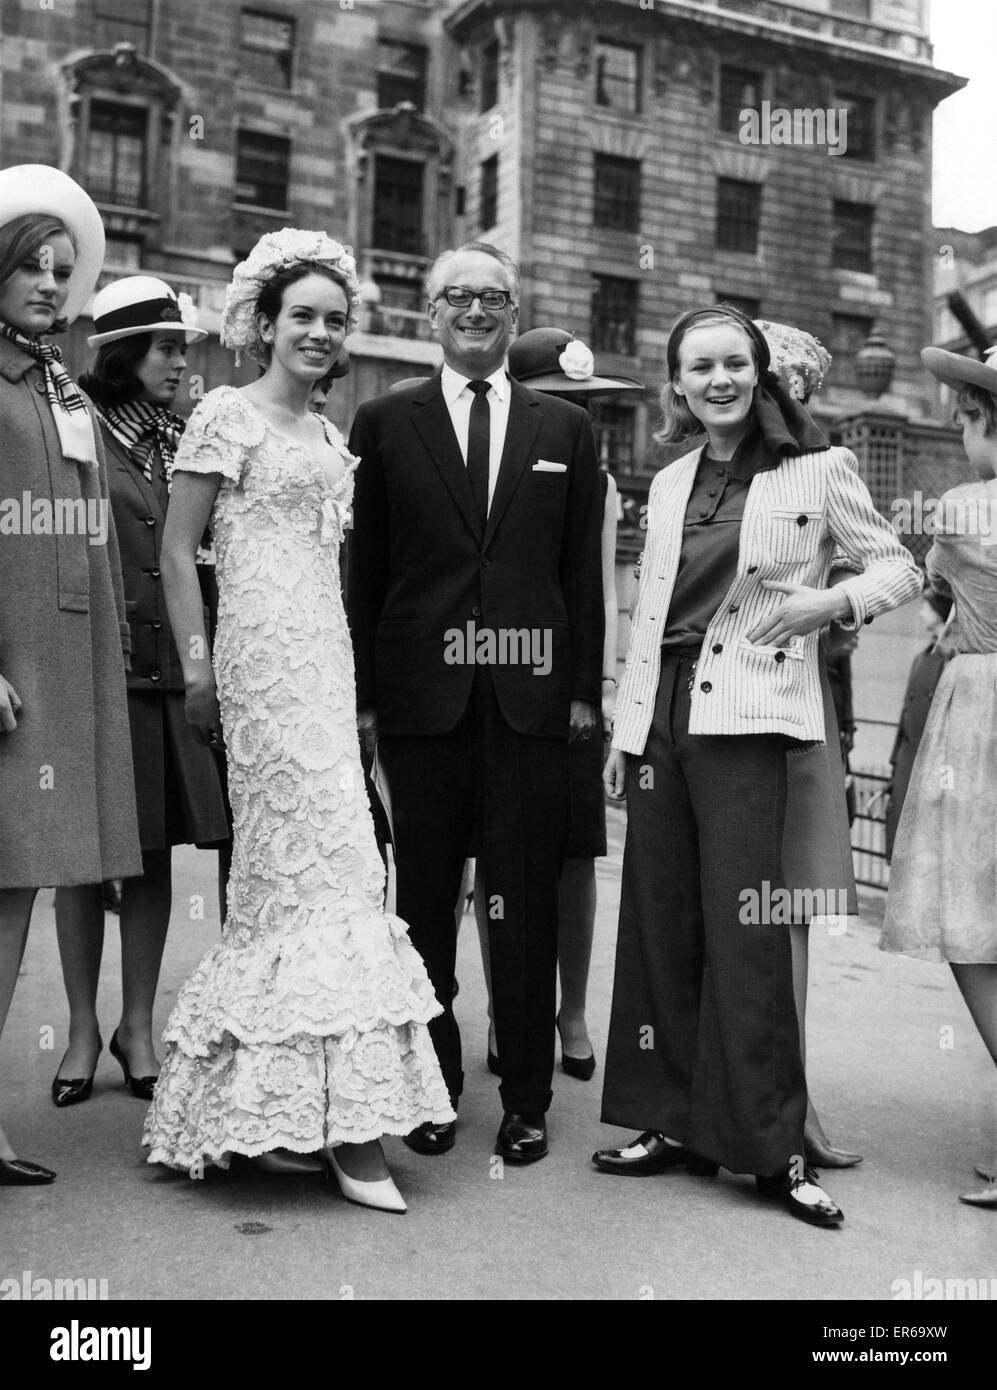 The Duke and the debs went to a fashion show yesterday (Monday 13-4-64). The Duke of Bedford to compare it. The debs, 17-year-old-Jessica Kitson (left), to model that long white lace evening gown, 'Pavillon de la Cascade,” and Frances Taylor modelling 'Ya Stock Photo